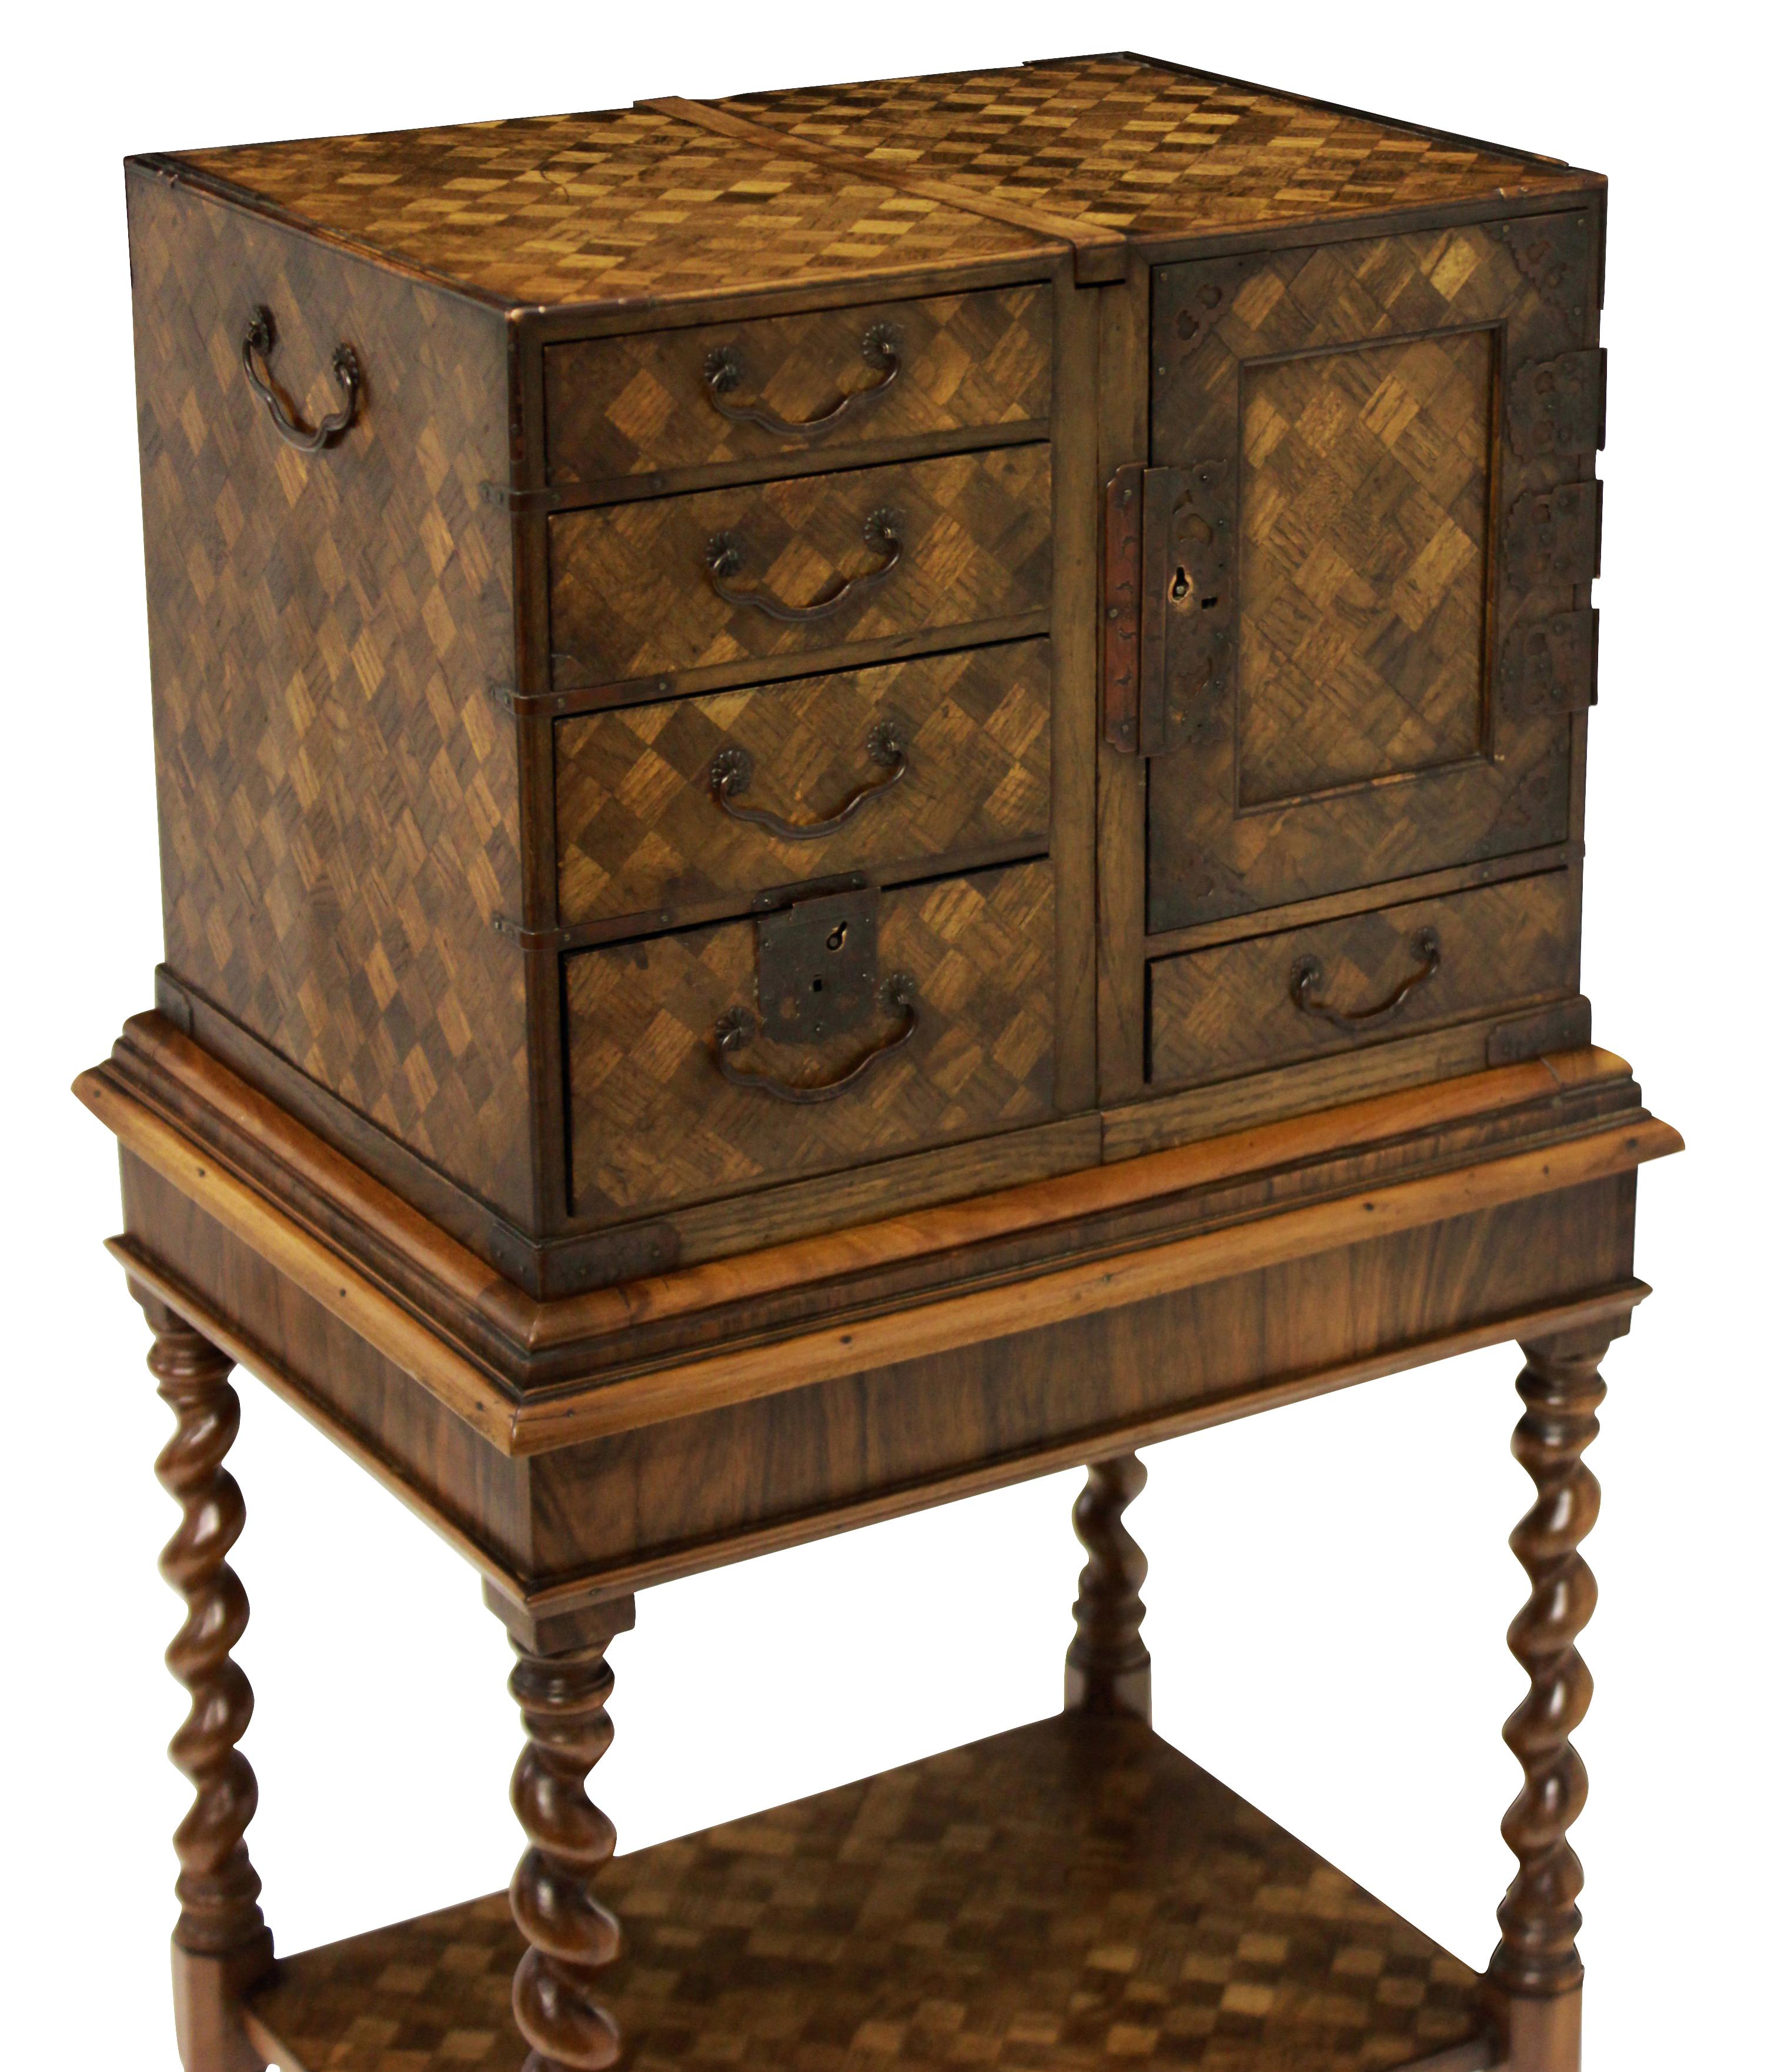 Early 18th Century William and Mary Chest on Stand